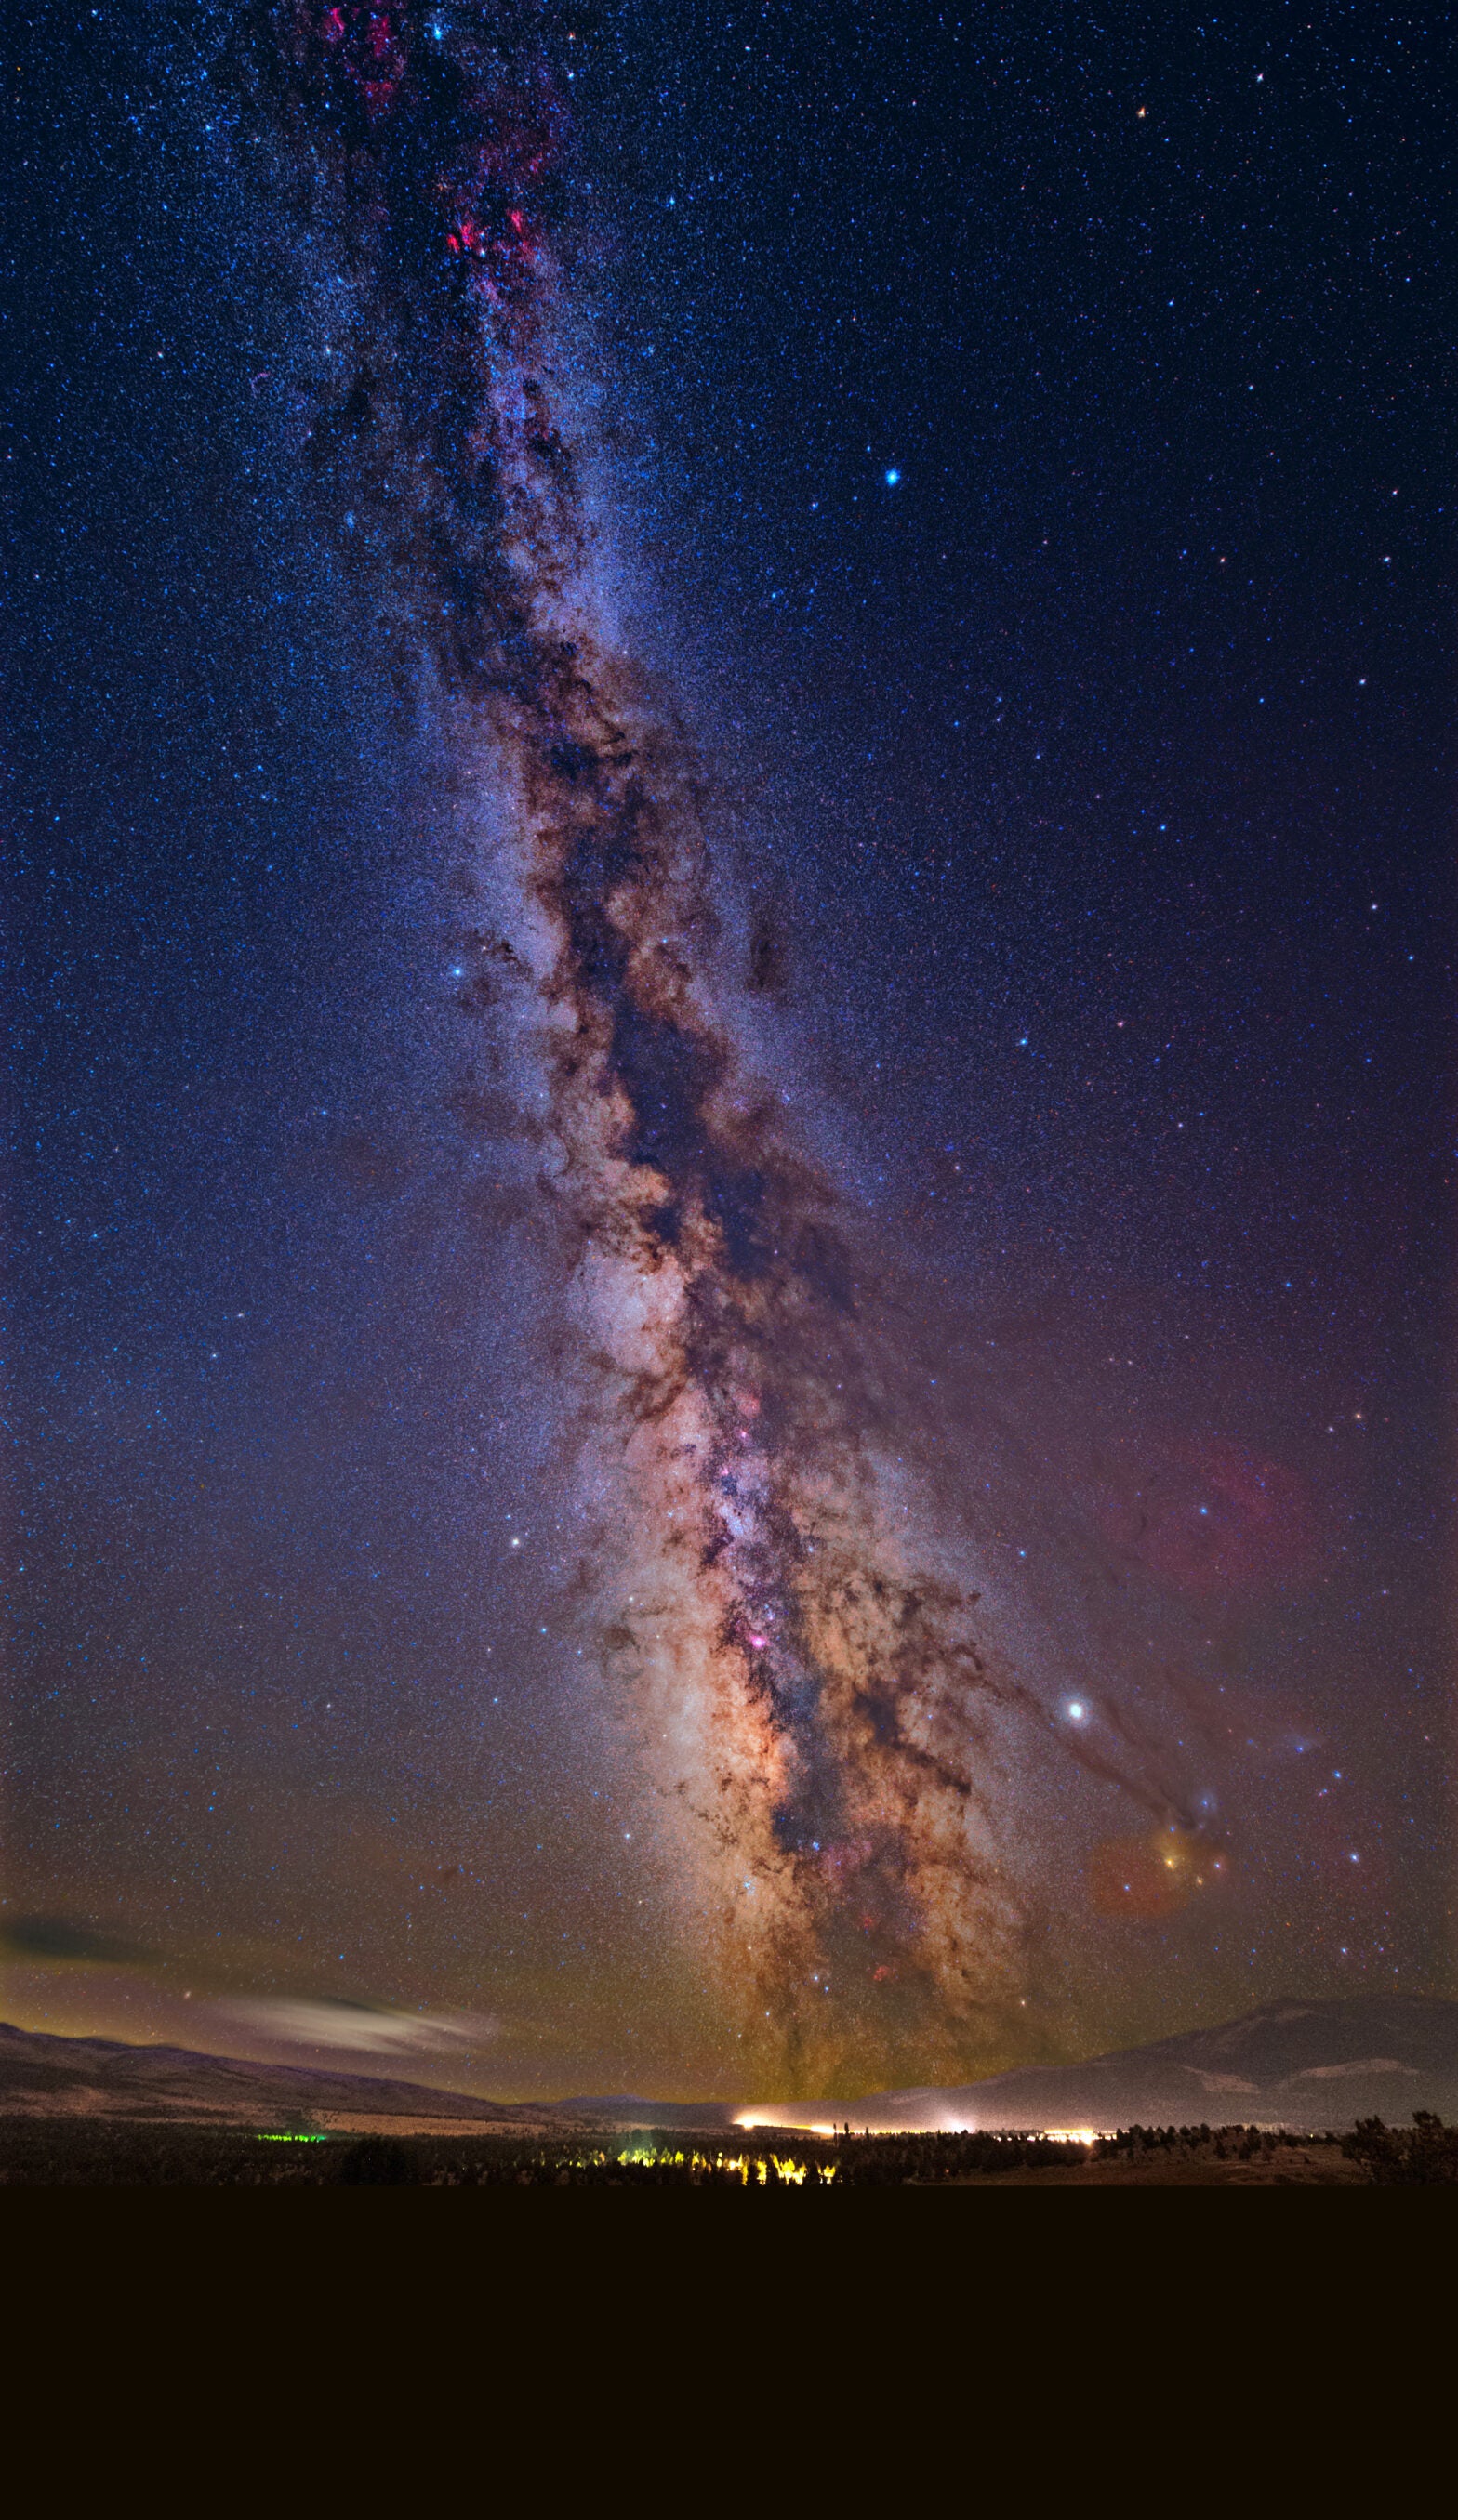 The summer Milky Way was photographed from a hilltop over the Modoc Plateau in California using ten 3-minute exposures and a Sigma Art 14mm lens. All photos were taken with a Nikon D750 DSLR, pre-processed in Adobe Bridge, and post-processed in Adobe Photoshop.